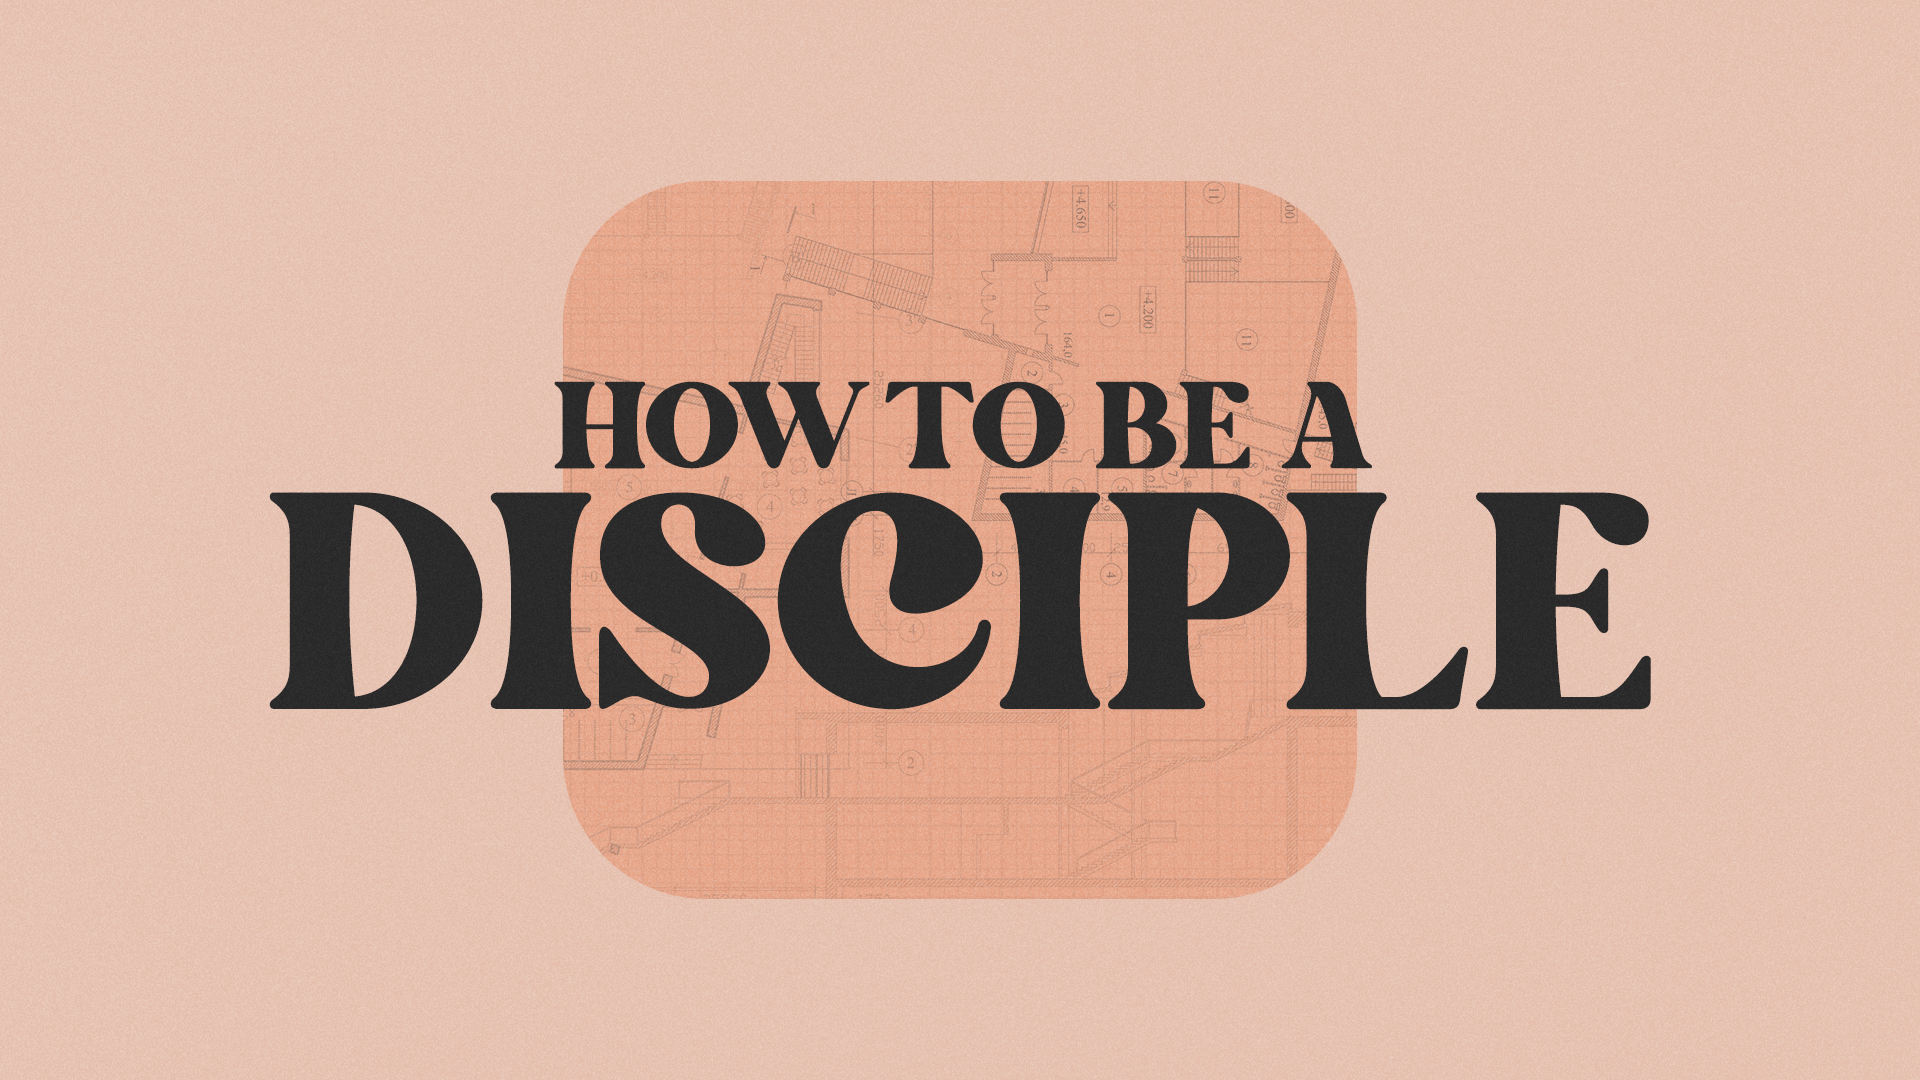 How To Be A Disciple